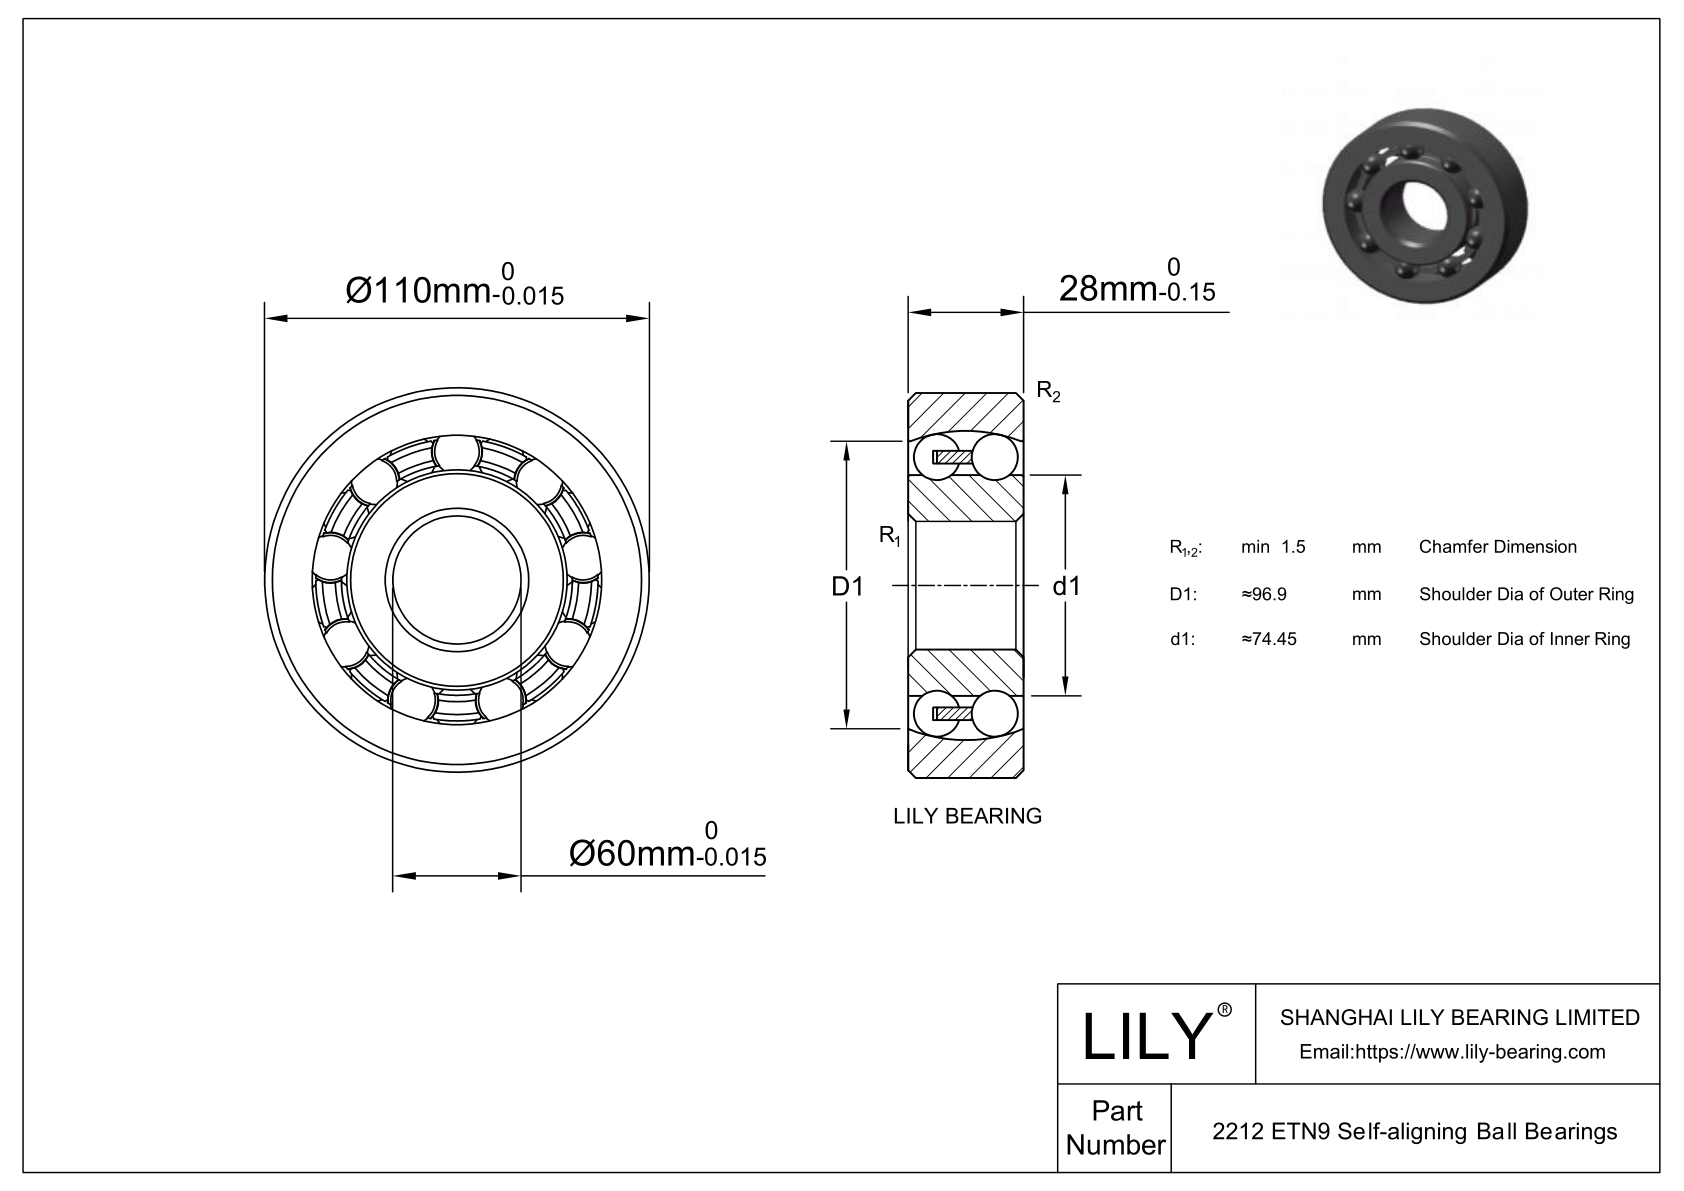 S2212 ETN9 Stainless Steel Self Aligning Ball Bearings cad drawing